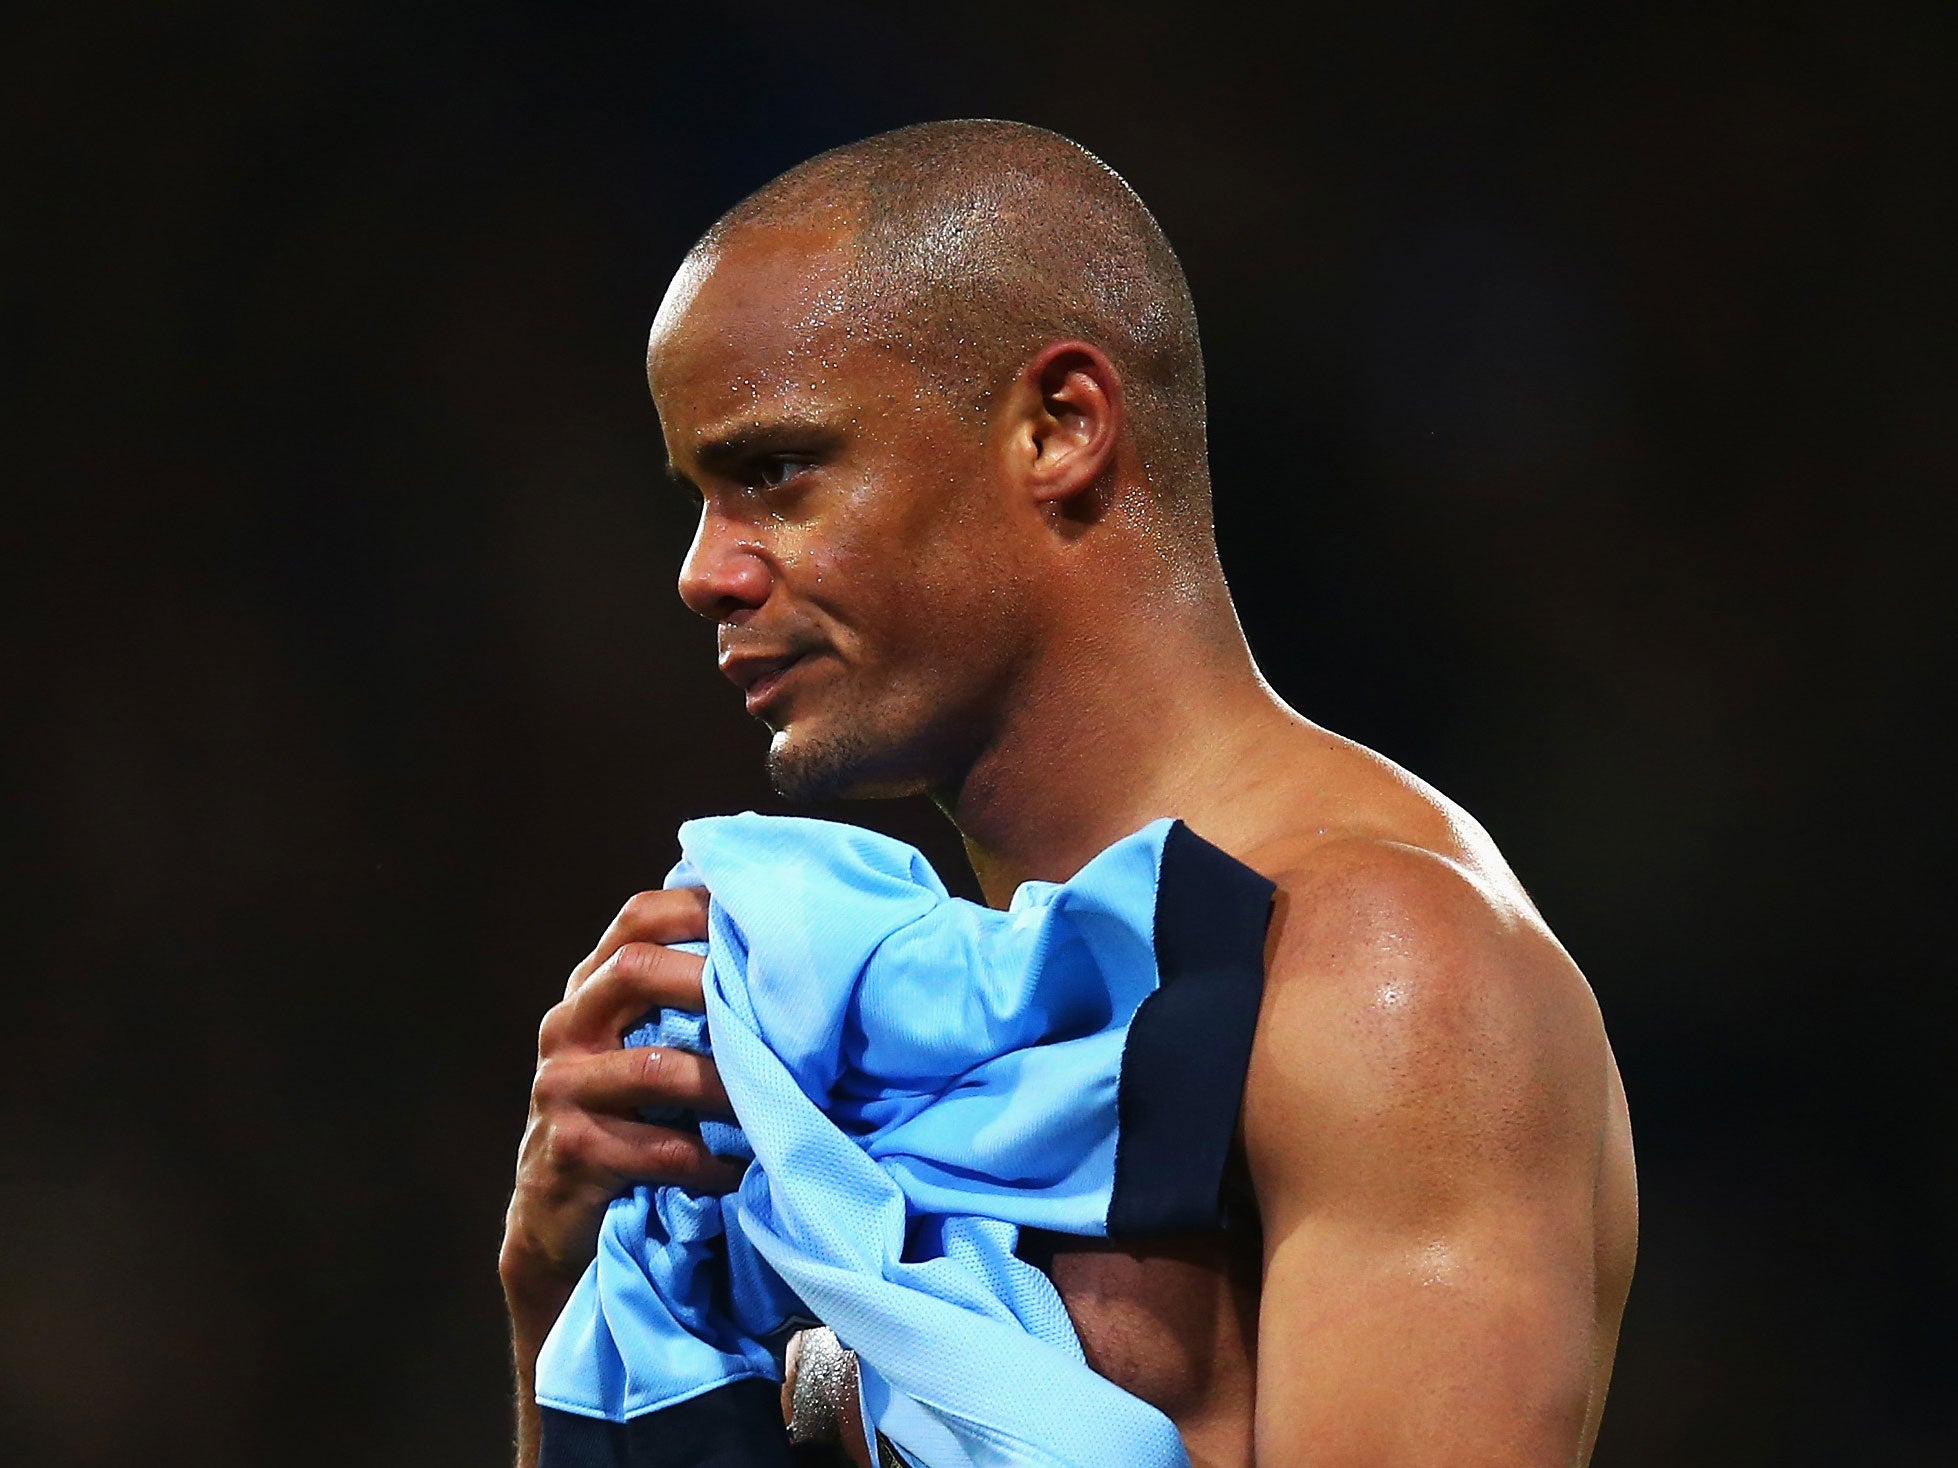 Vincent Kompany: We have a talent group, I wouldn't say no to more!, Video, Watch TV Show